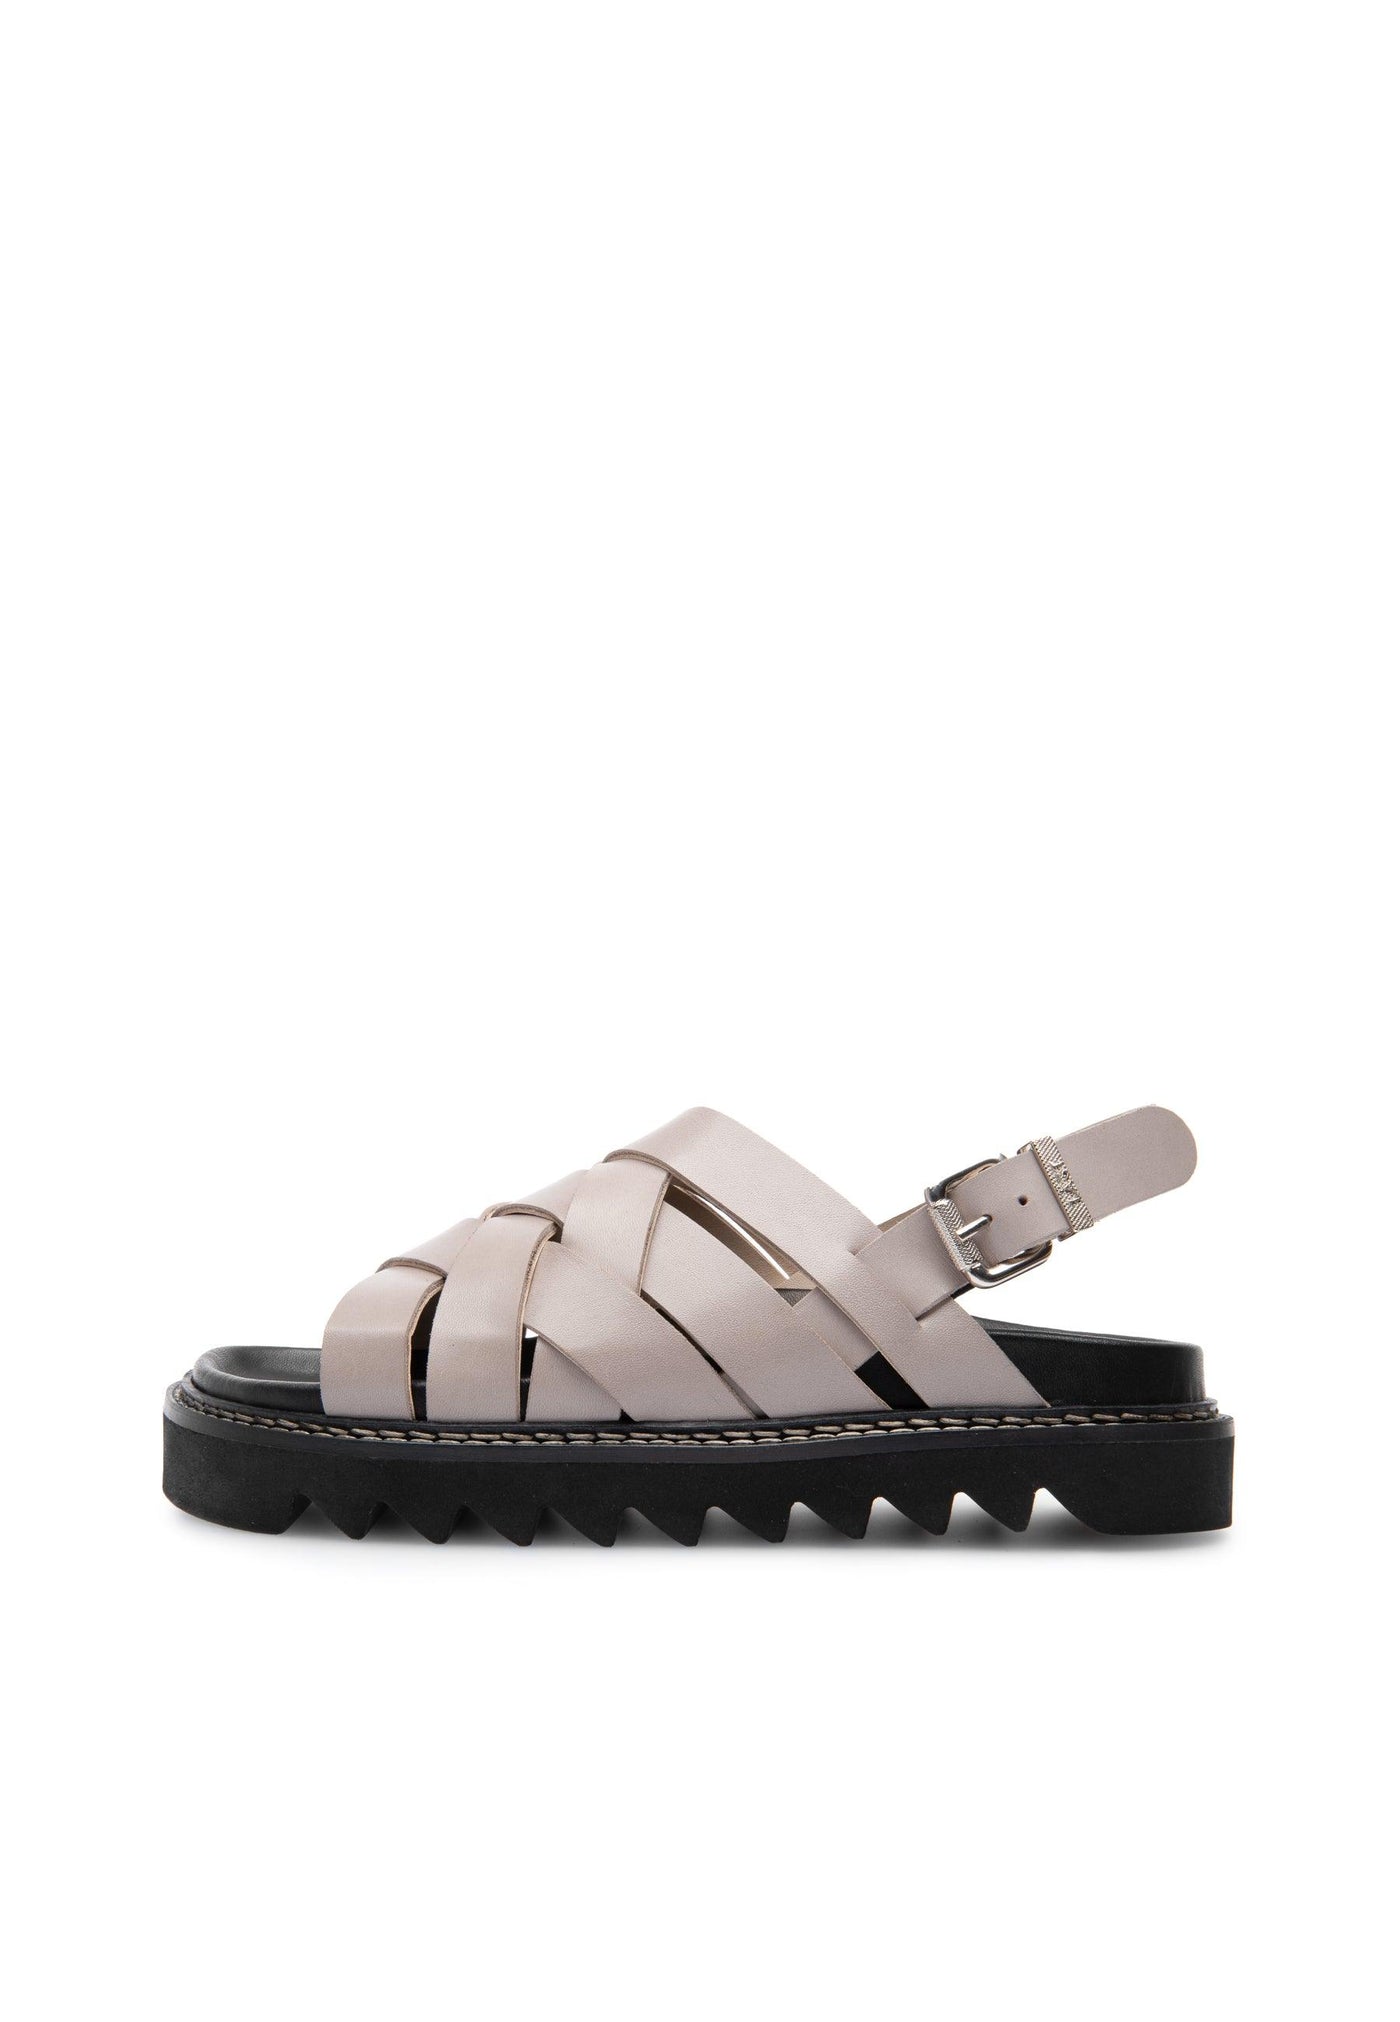 LÄST Maggie - Leather - Taupe Sandals Taupe